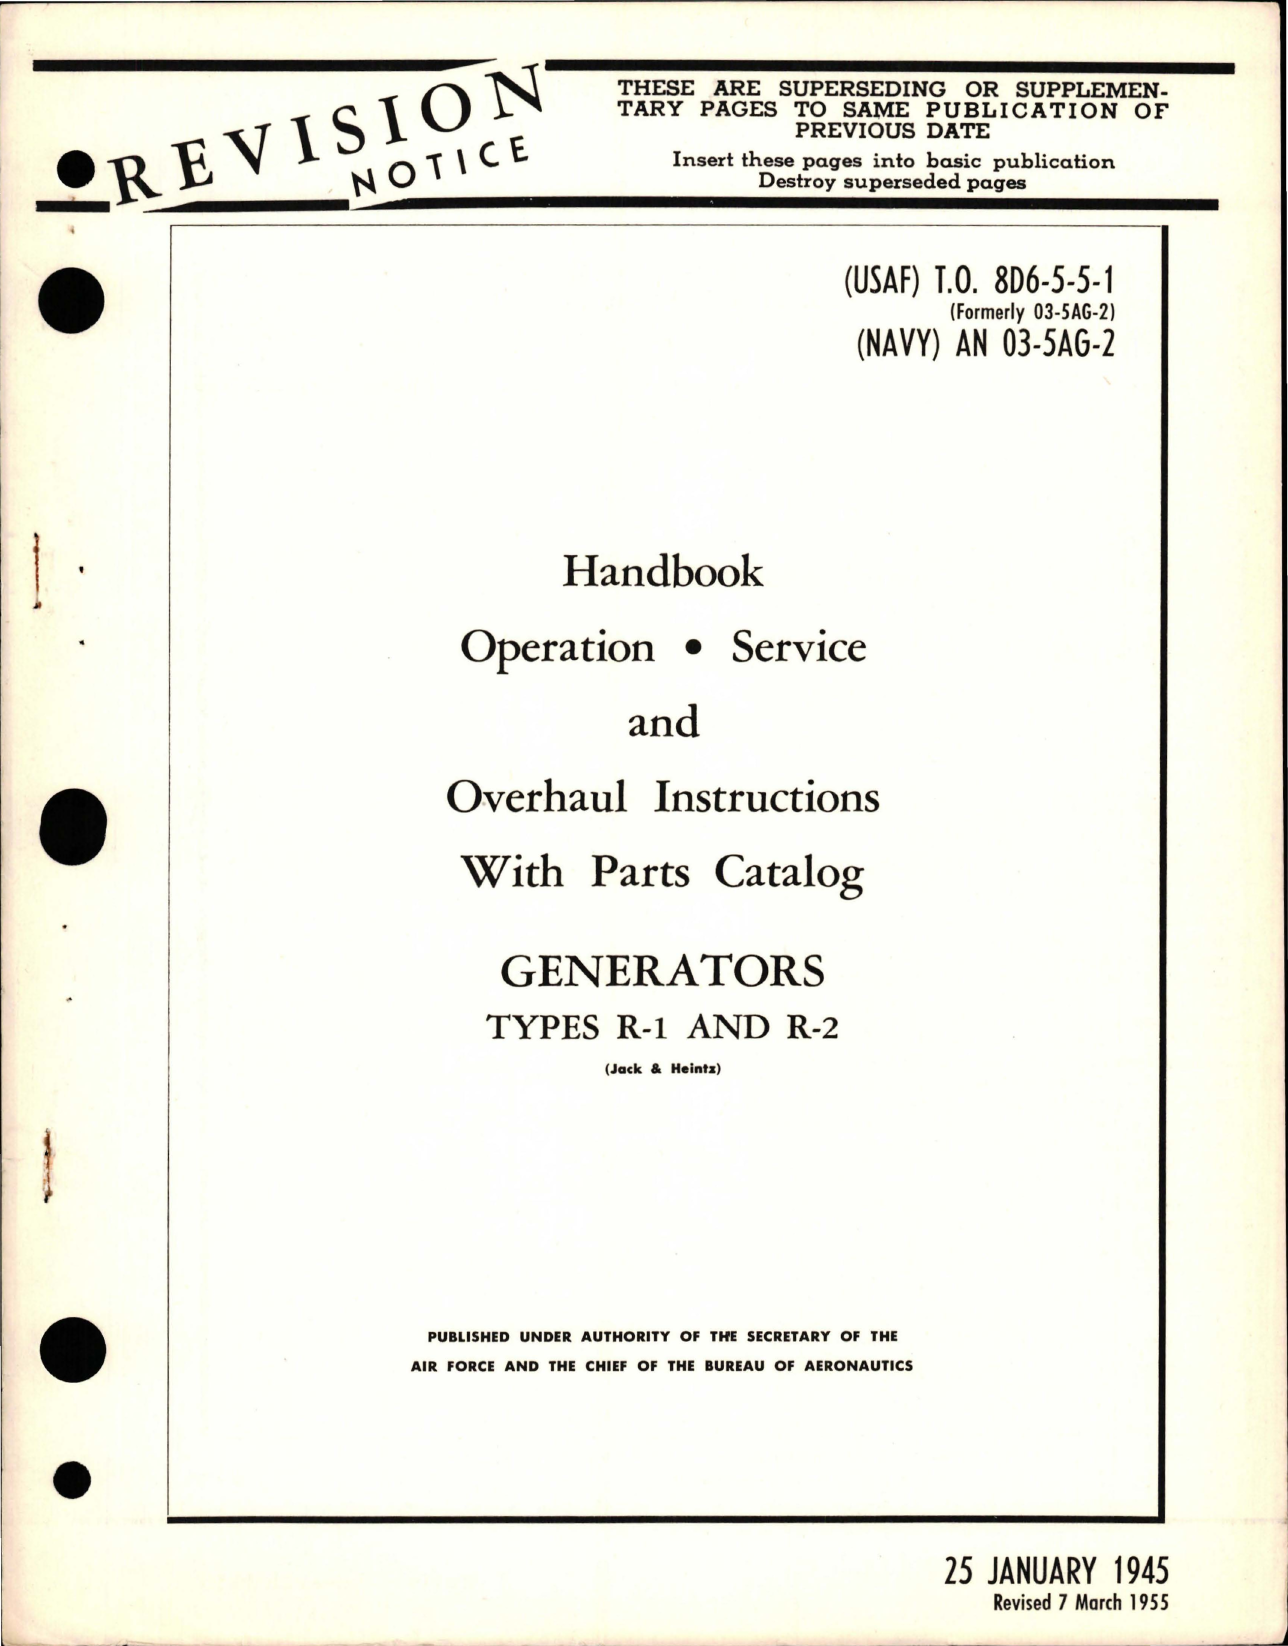 Sample page 1 from AirCorps Library document: Operation, Service, and Overhaul Instructions with Parts Catalog for Generators - Types R-1 and R-2